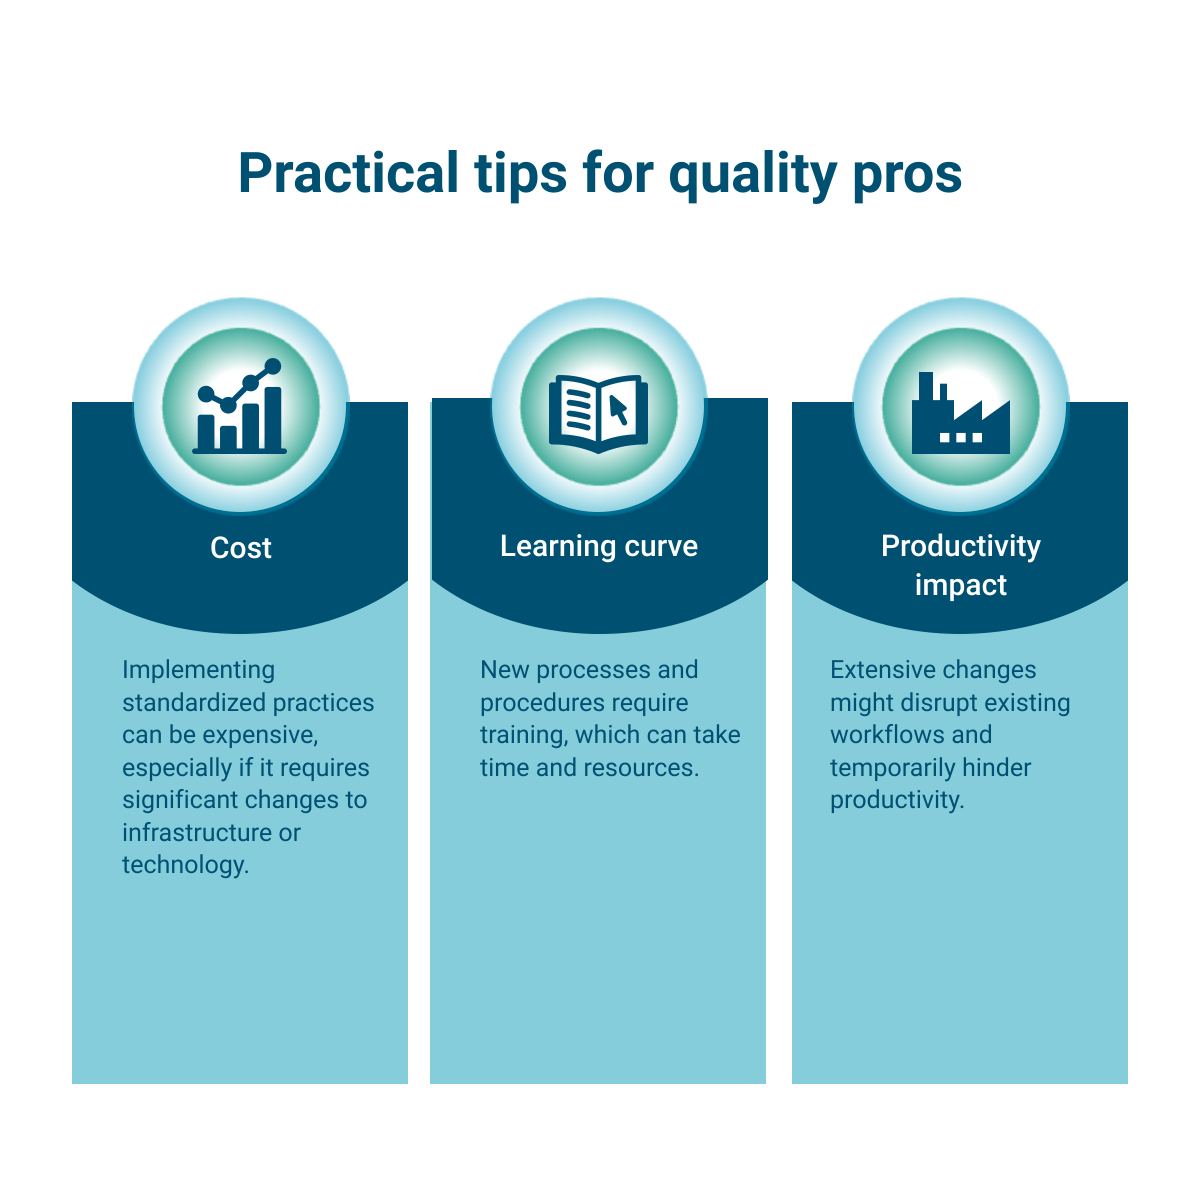 Practical tips for quality pros